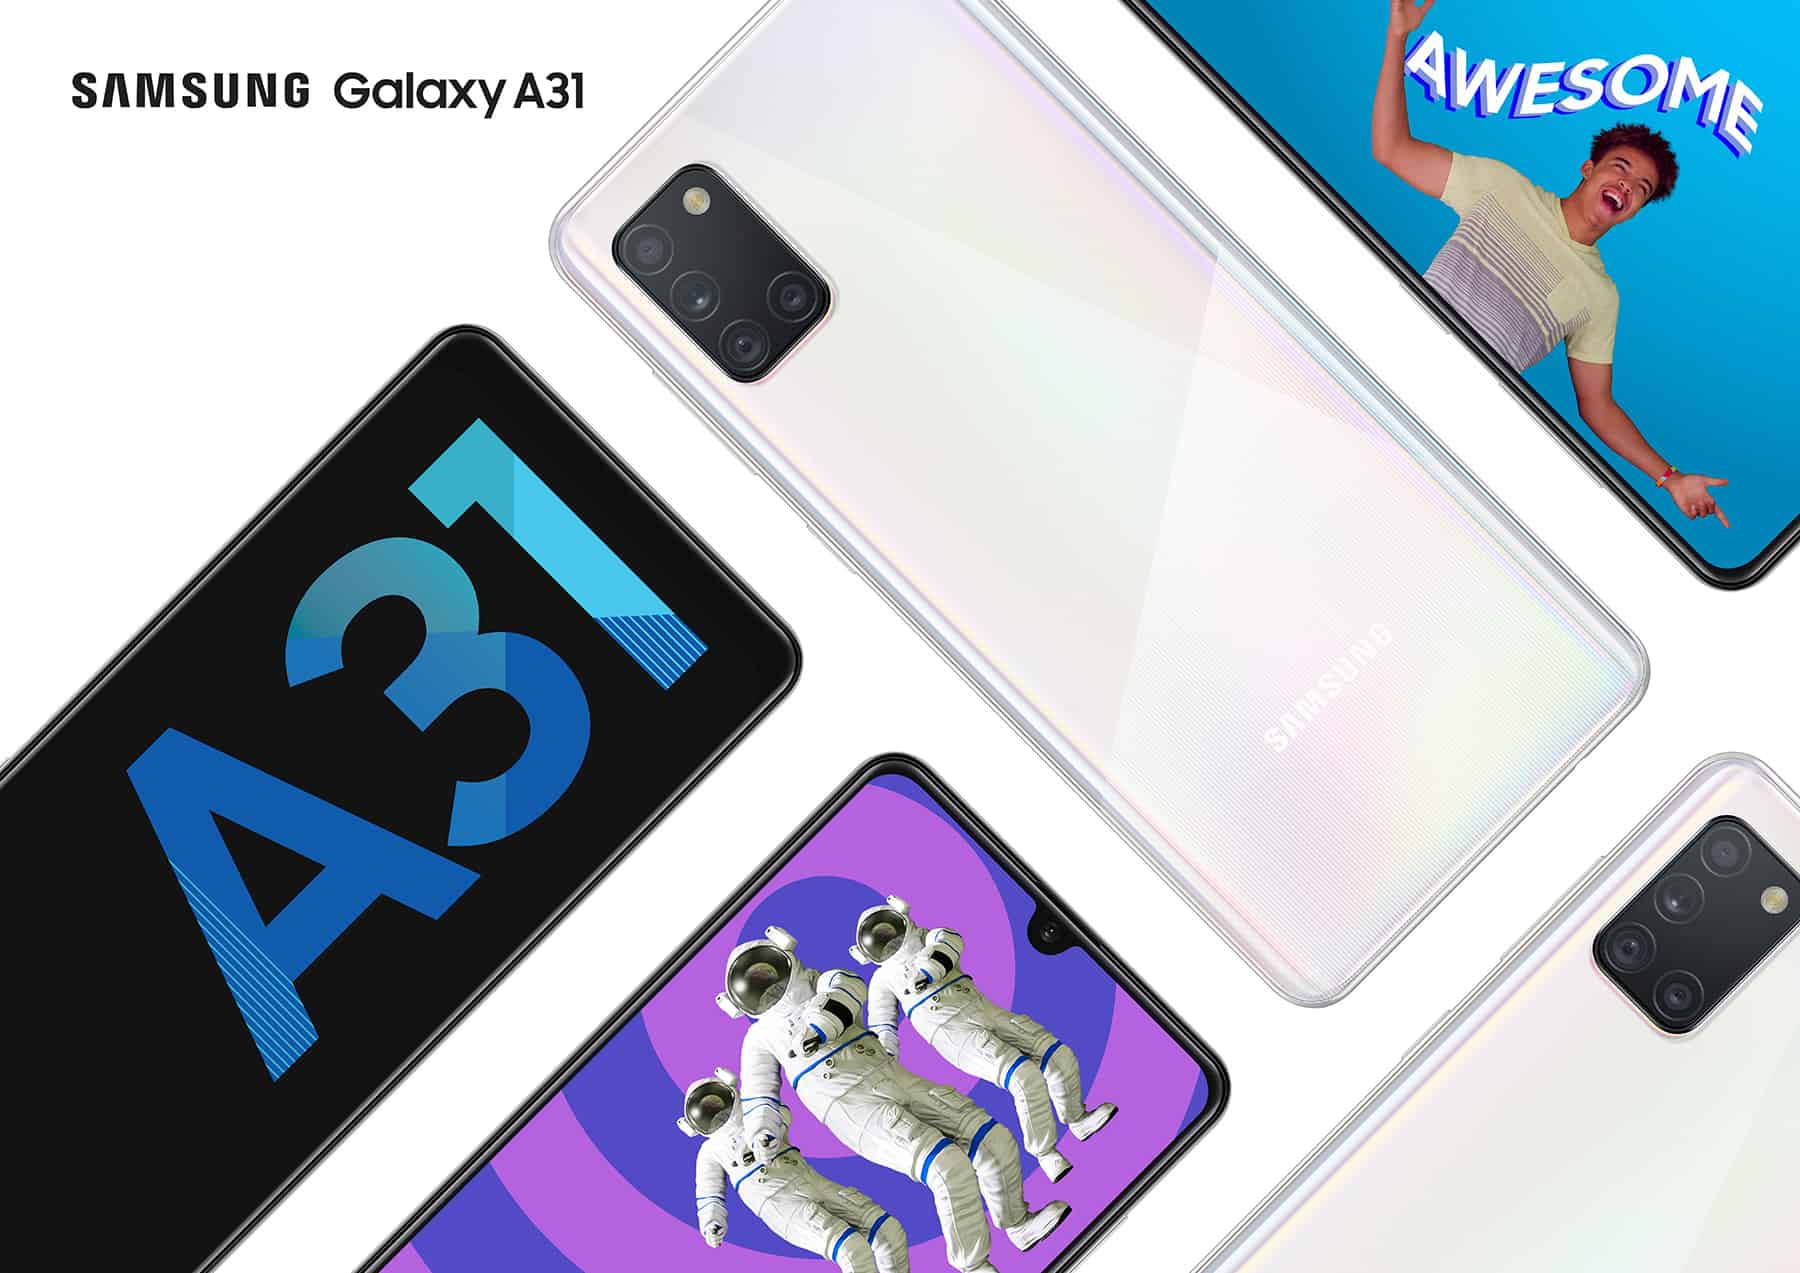 Samsung Galaxy A31 launch in India in first week of June, price surfaces